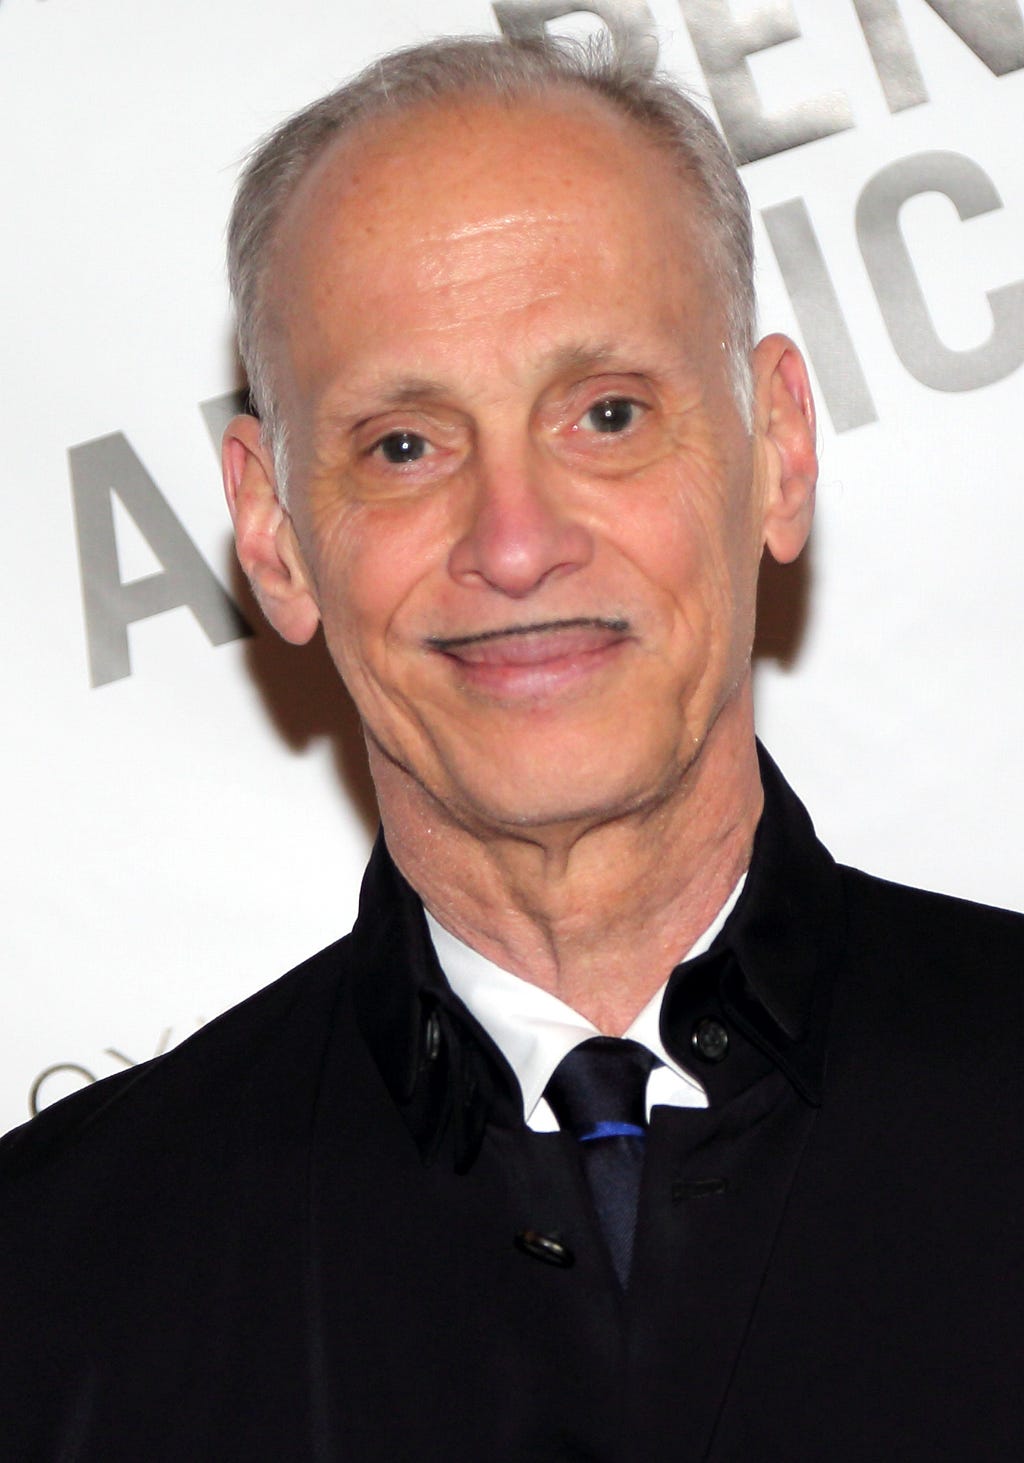 John Waters — By PEN American Center — https://www.flickr.com/photos/penamericancenter/13944944999/, CC BY 2.0, https://commons.wikimedia.org/w/index.php?curid=33735824